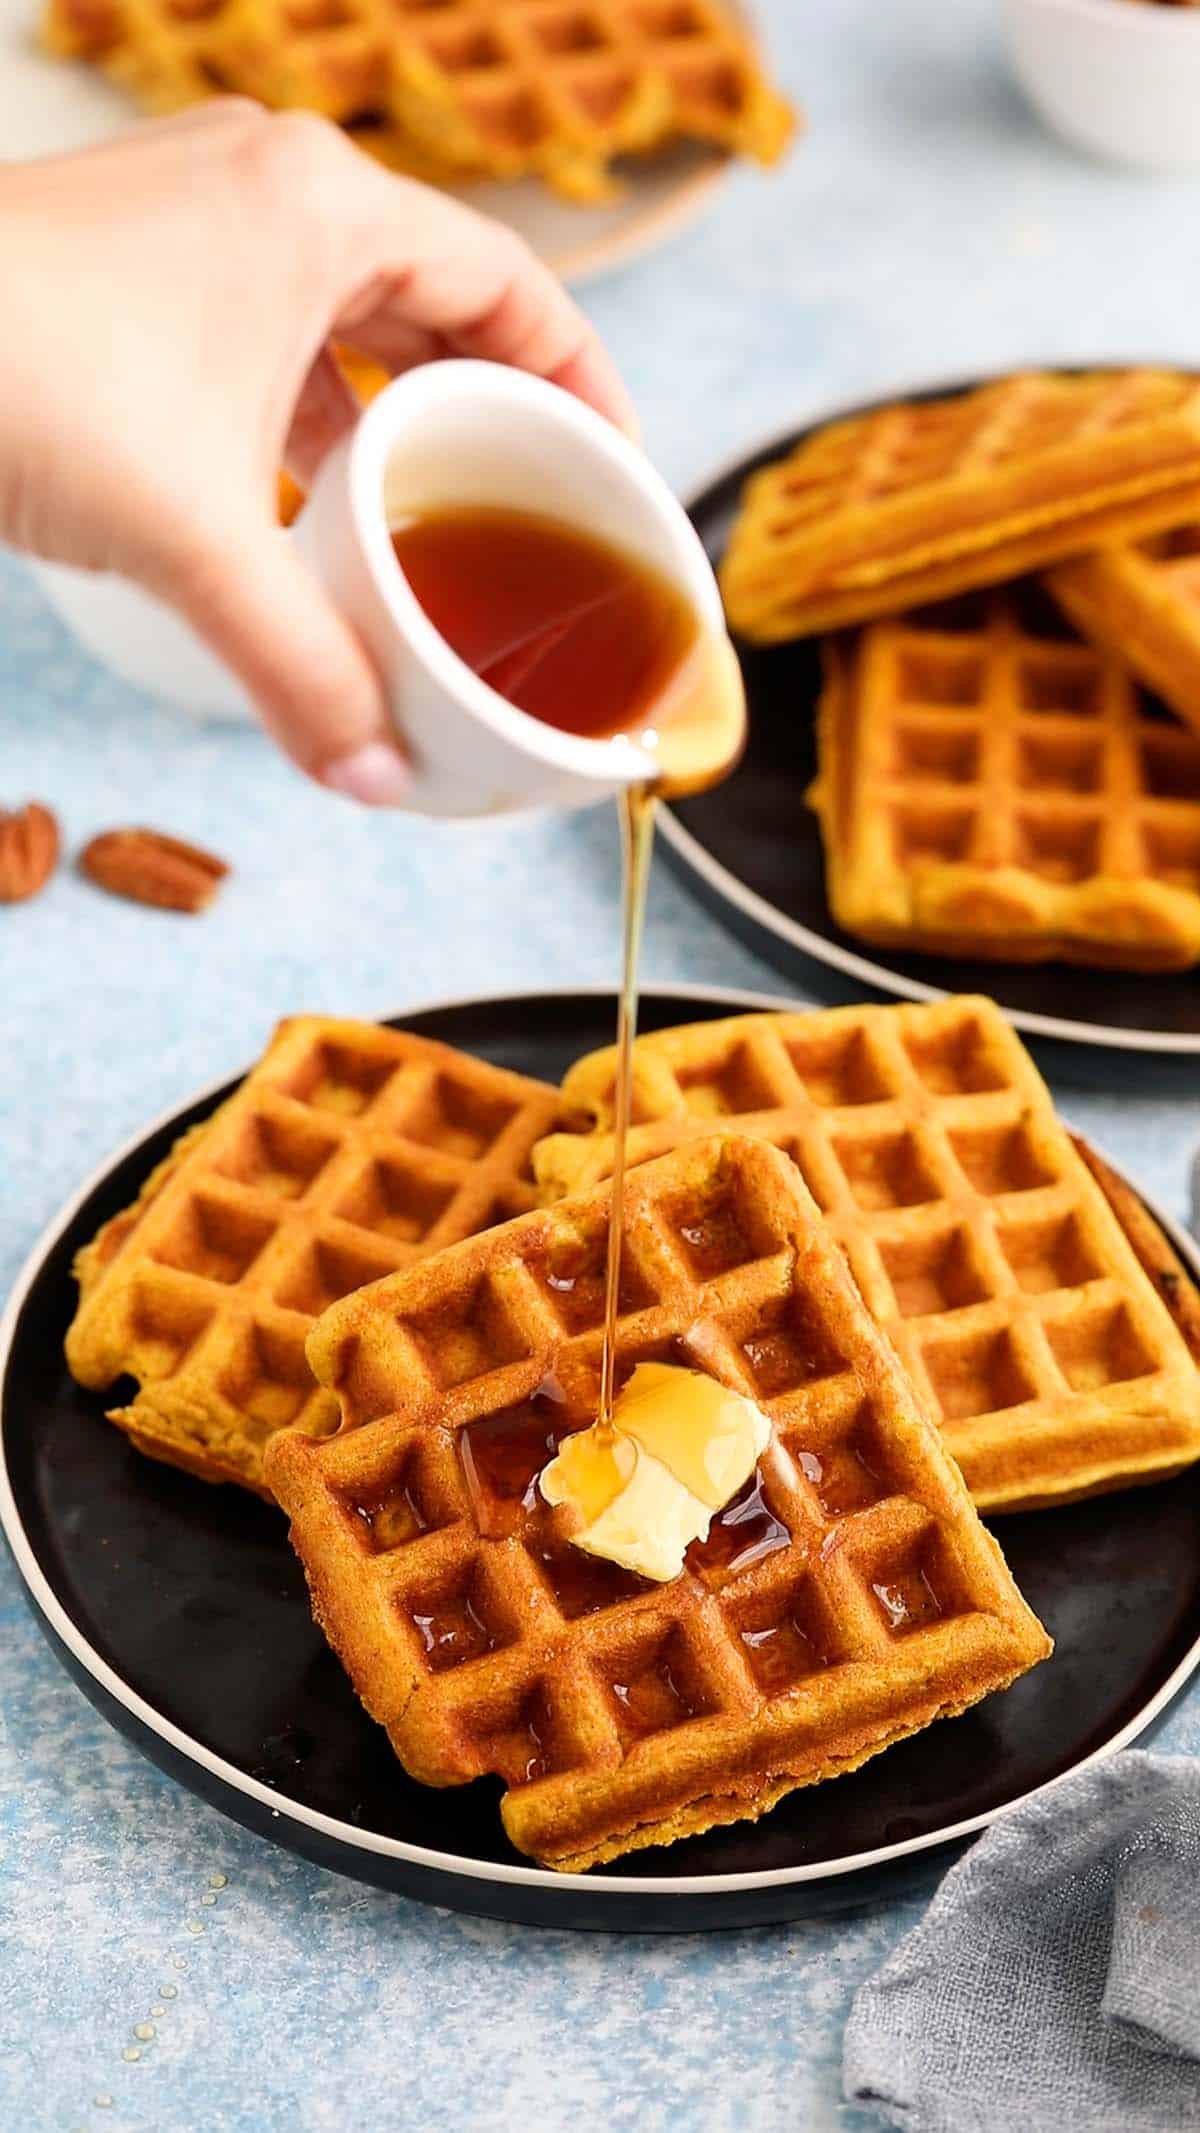 a hand pouring syrup on top of 3 waffles placed on a black plate, topped with some butter.